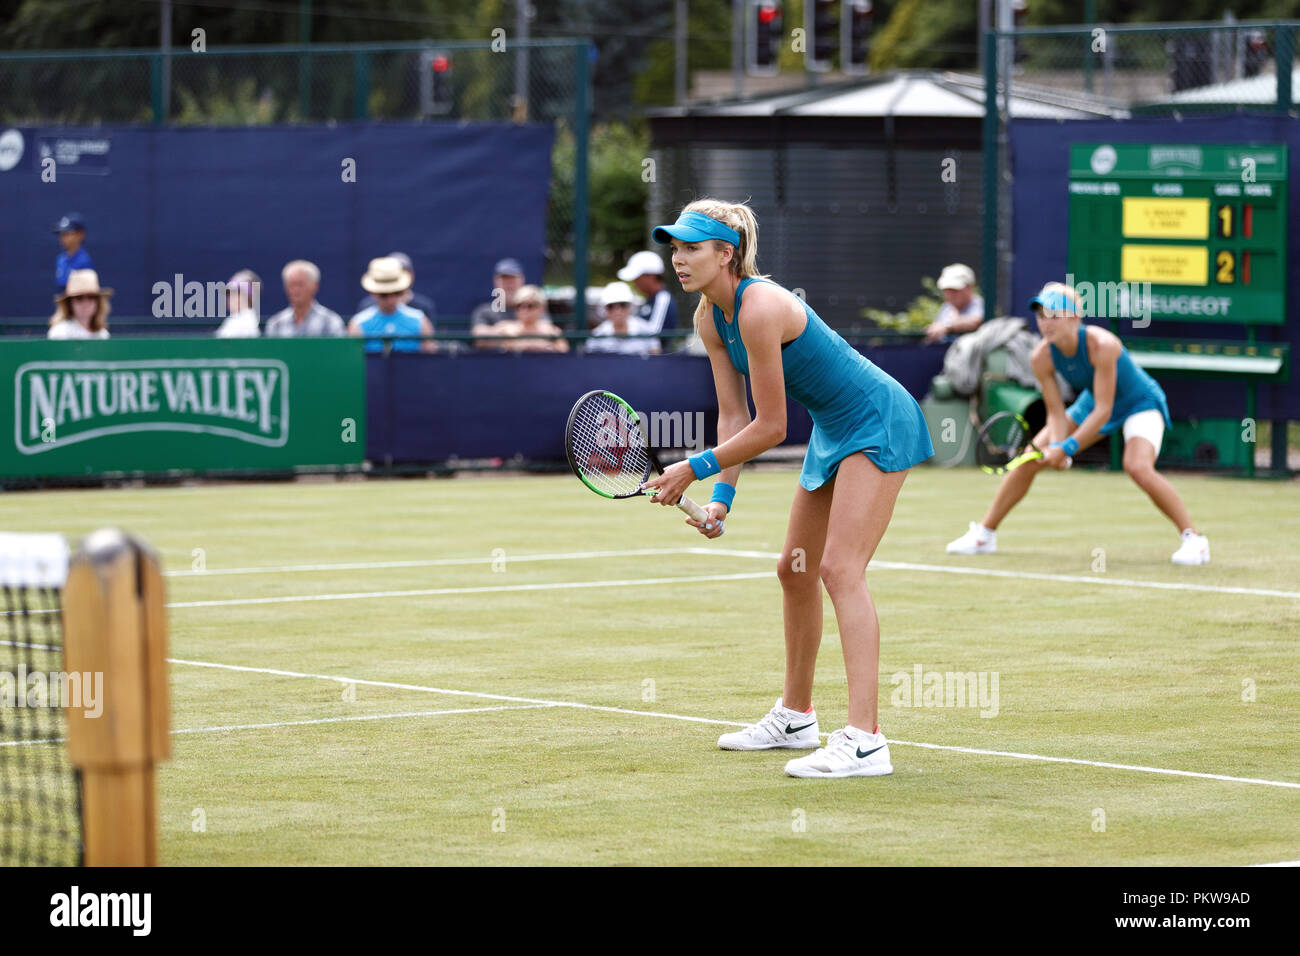 British tennis players Katie Boulter (foreground) and Katie Swan (background) await their opponent's serve during a women's doubles match at a professional grass court tournament in the United Kingdom. Boulter and Swan played together in matching outfits. Stock Photo